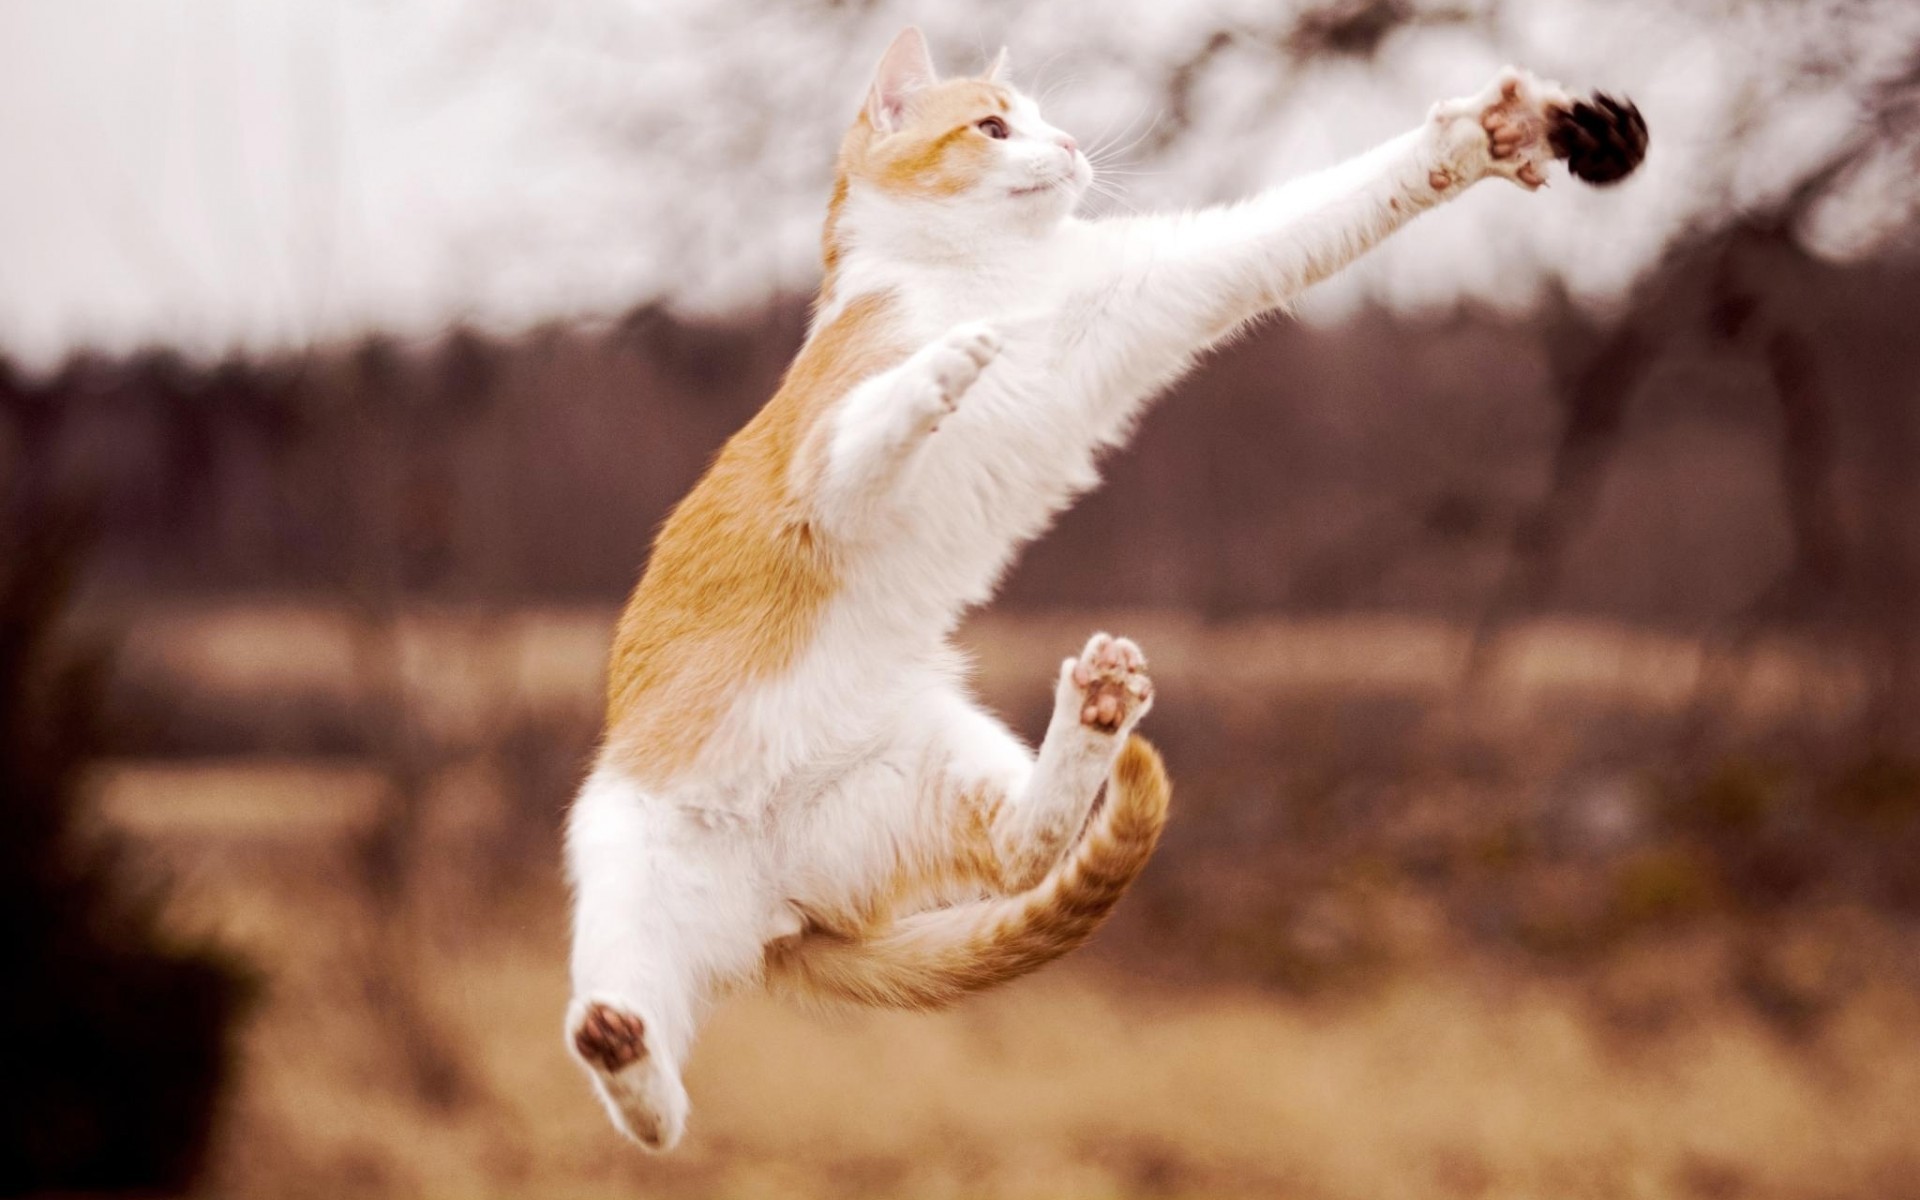 Cats jumping blurred background wallpapers and images - wallpapers